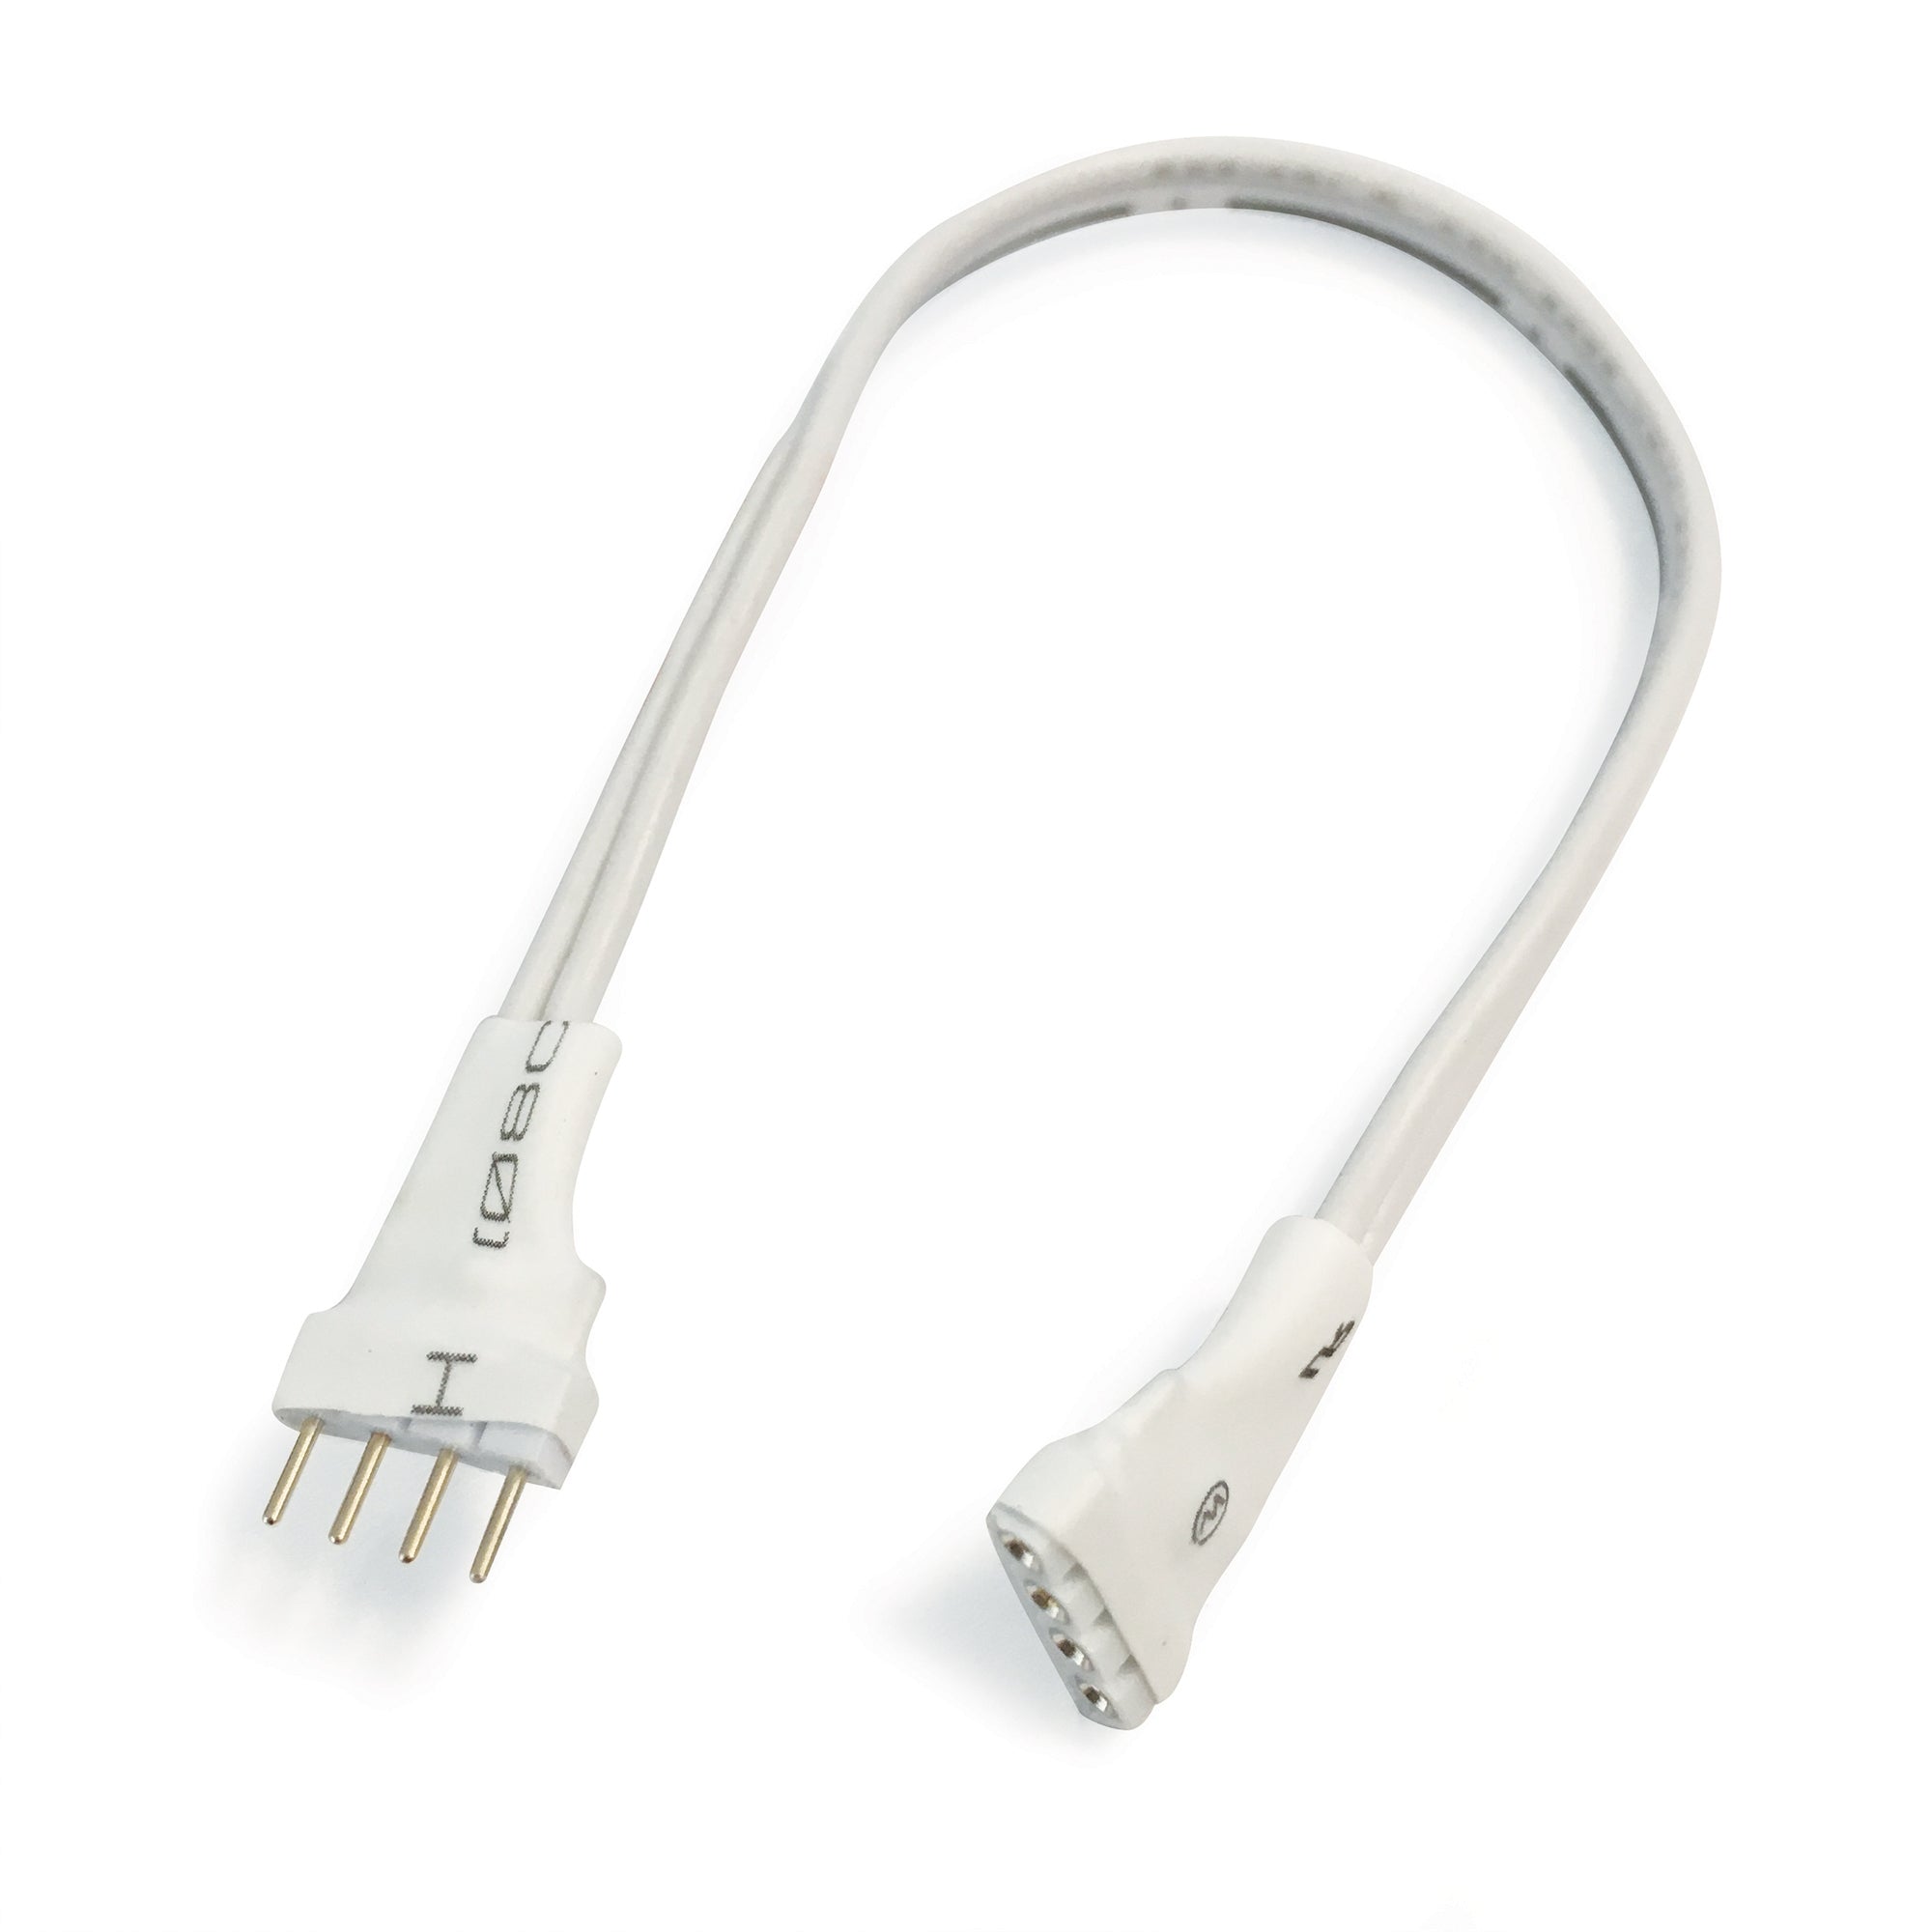 Nora Lighting NARGB-718W - Accent / Undercabinet - 18 Inch Interconnection Cable for 12V or 24V RGB & CCT Tape Light